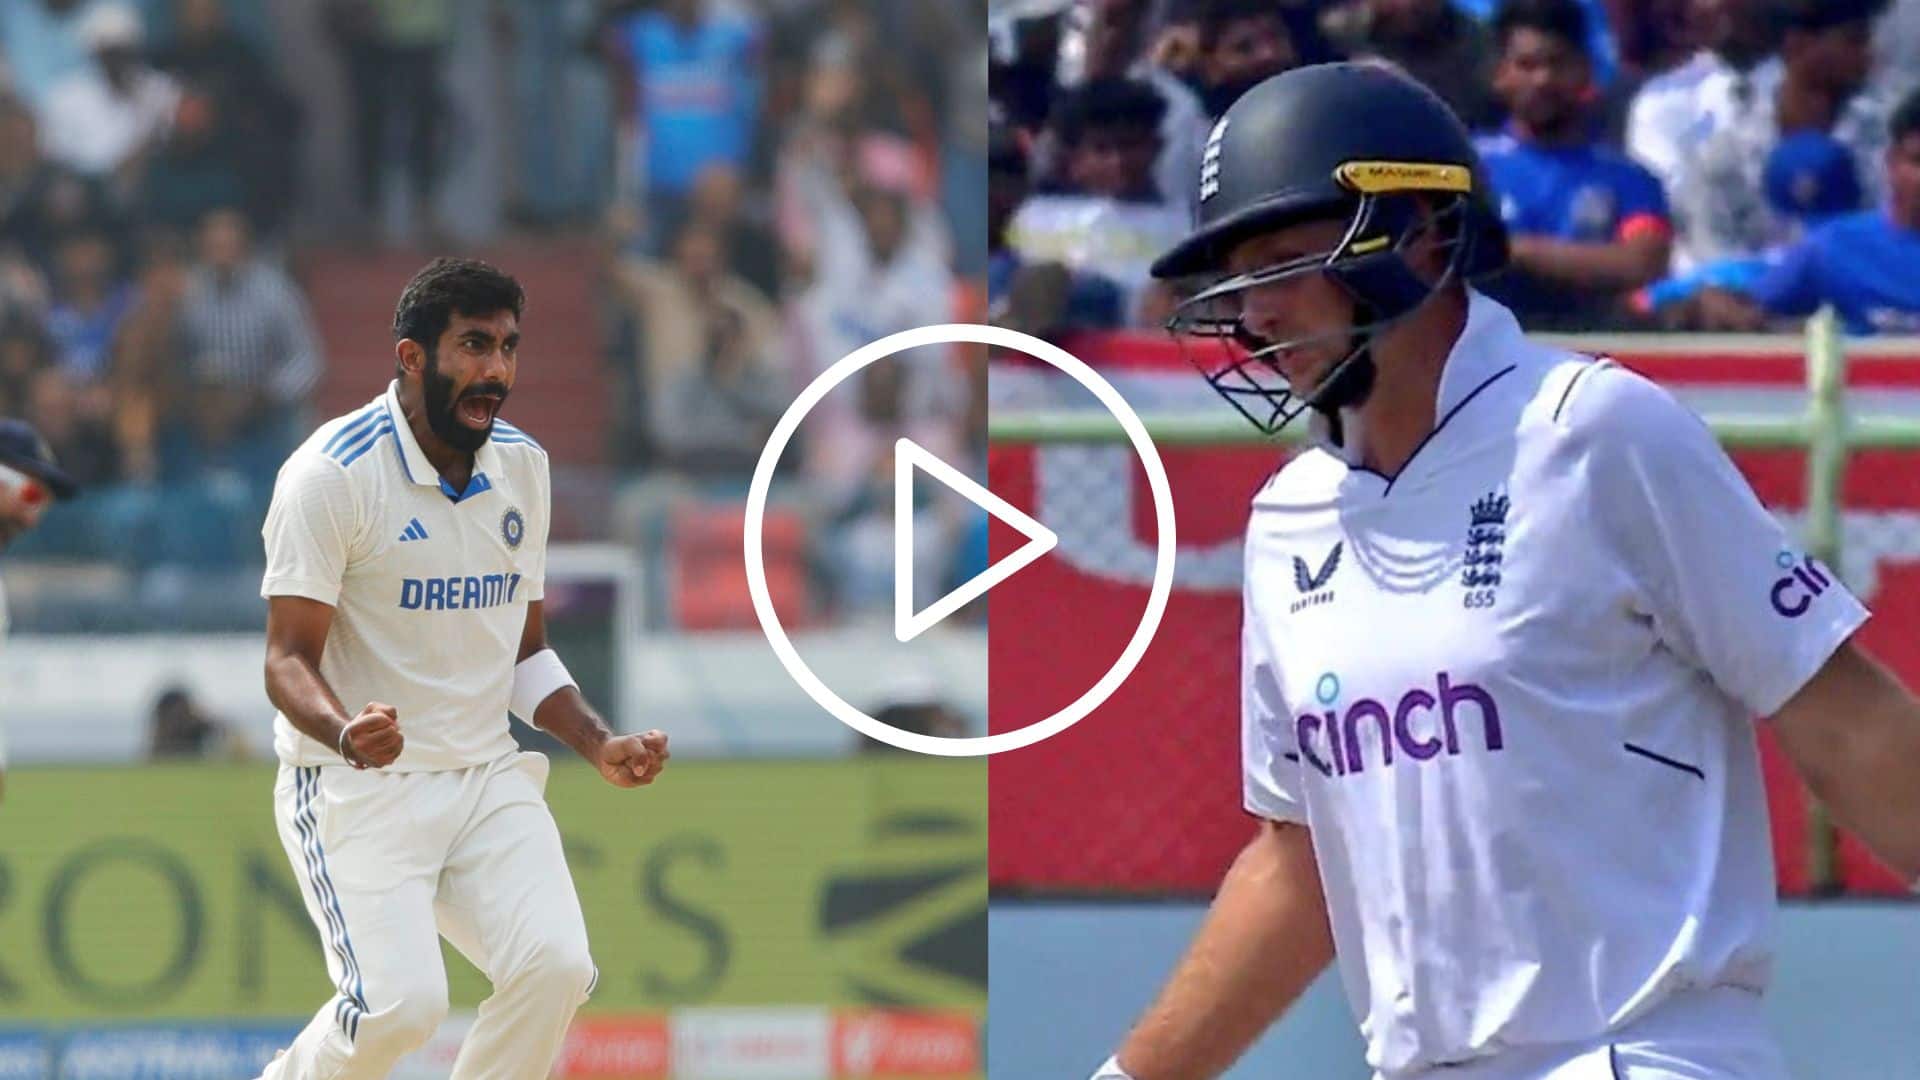 [Watch] Jasprit Bumrah's GOAT Bowling Spell Leaves Joe Root Humiliated